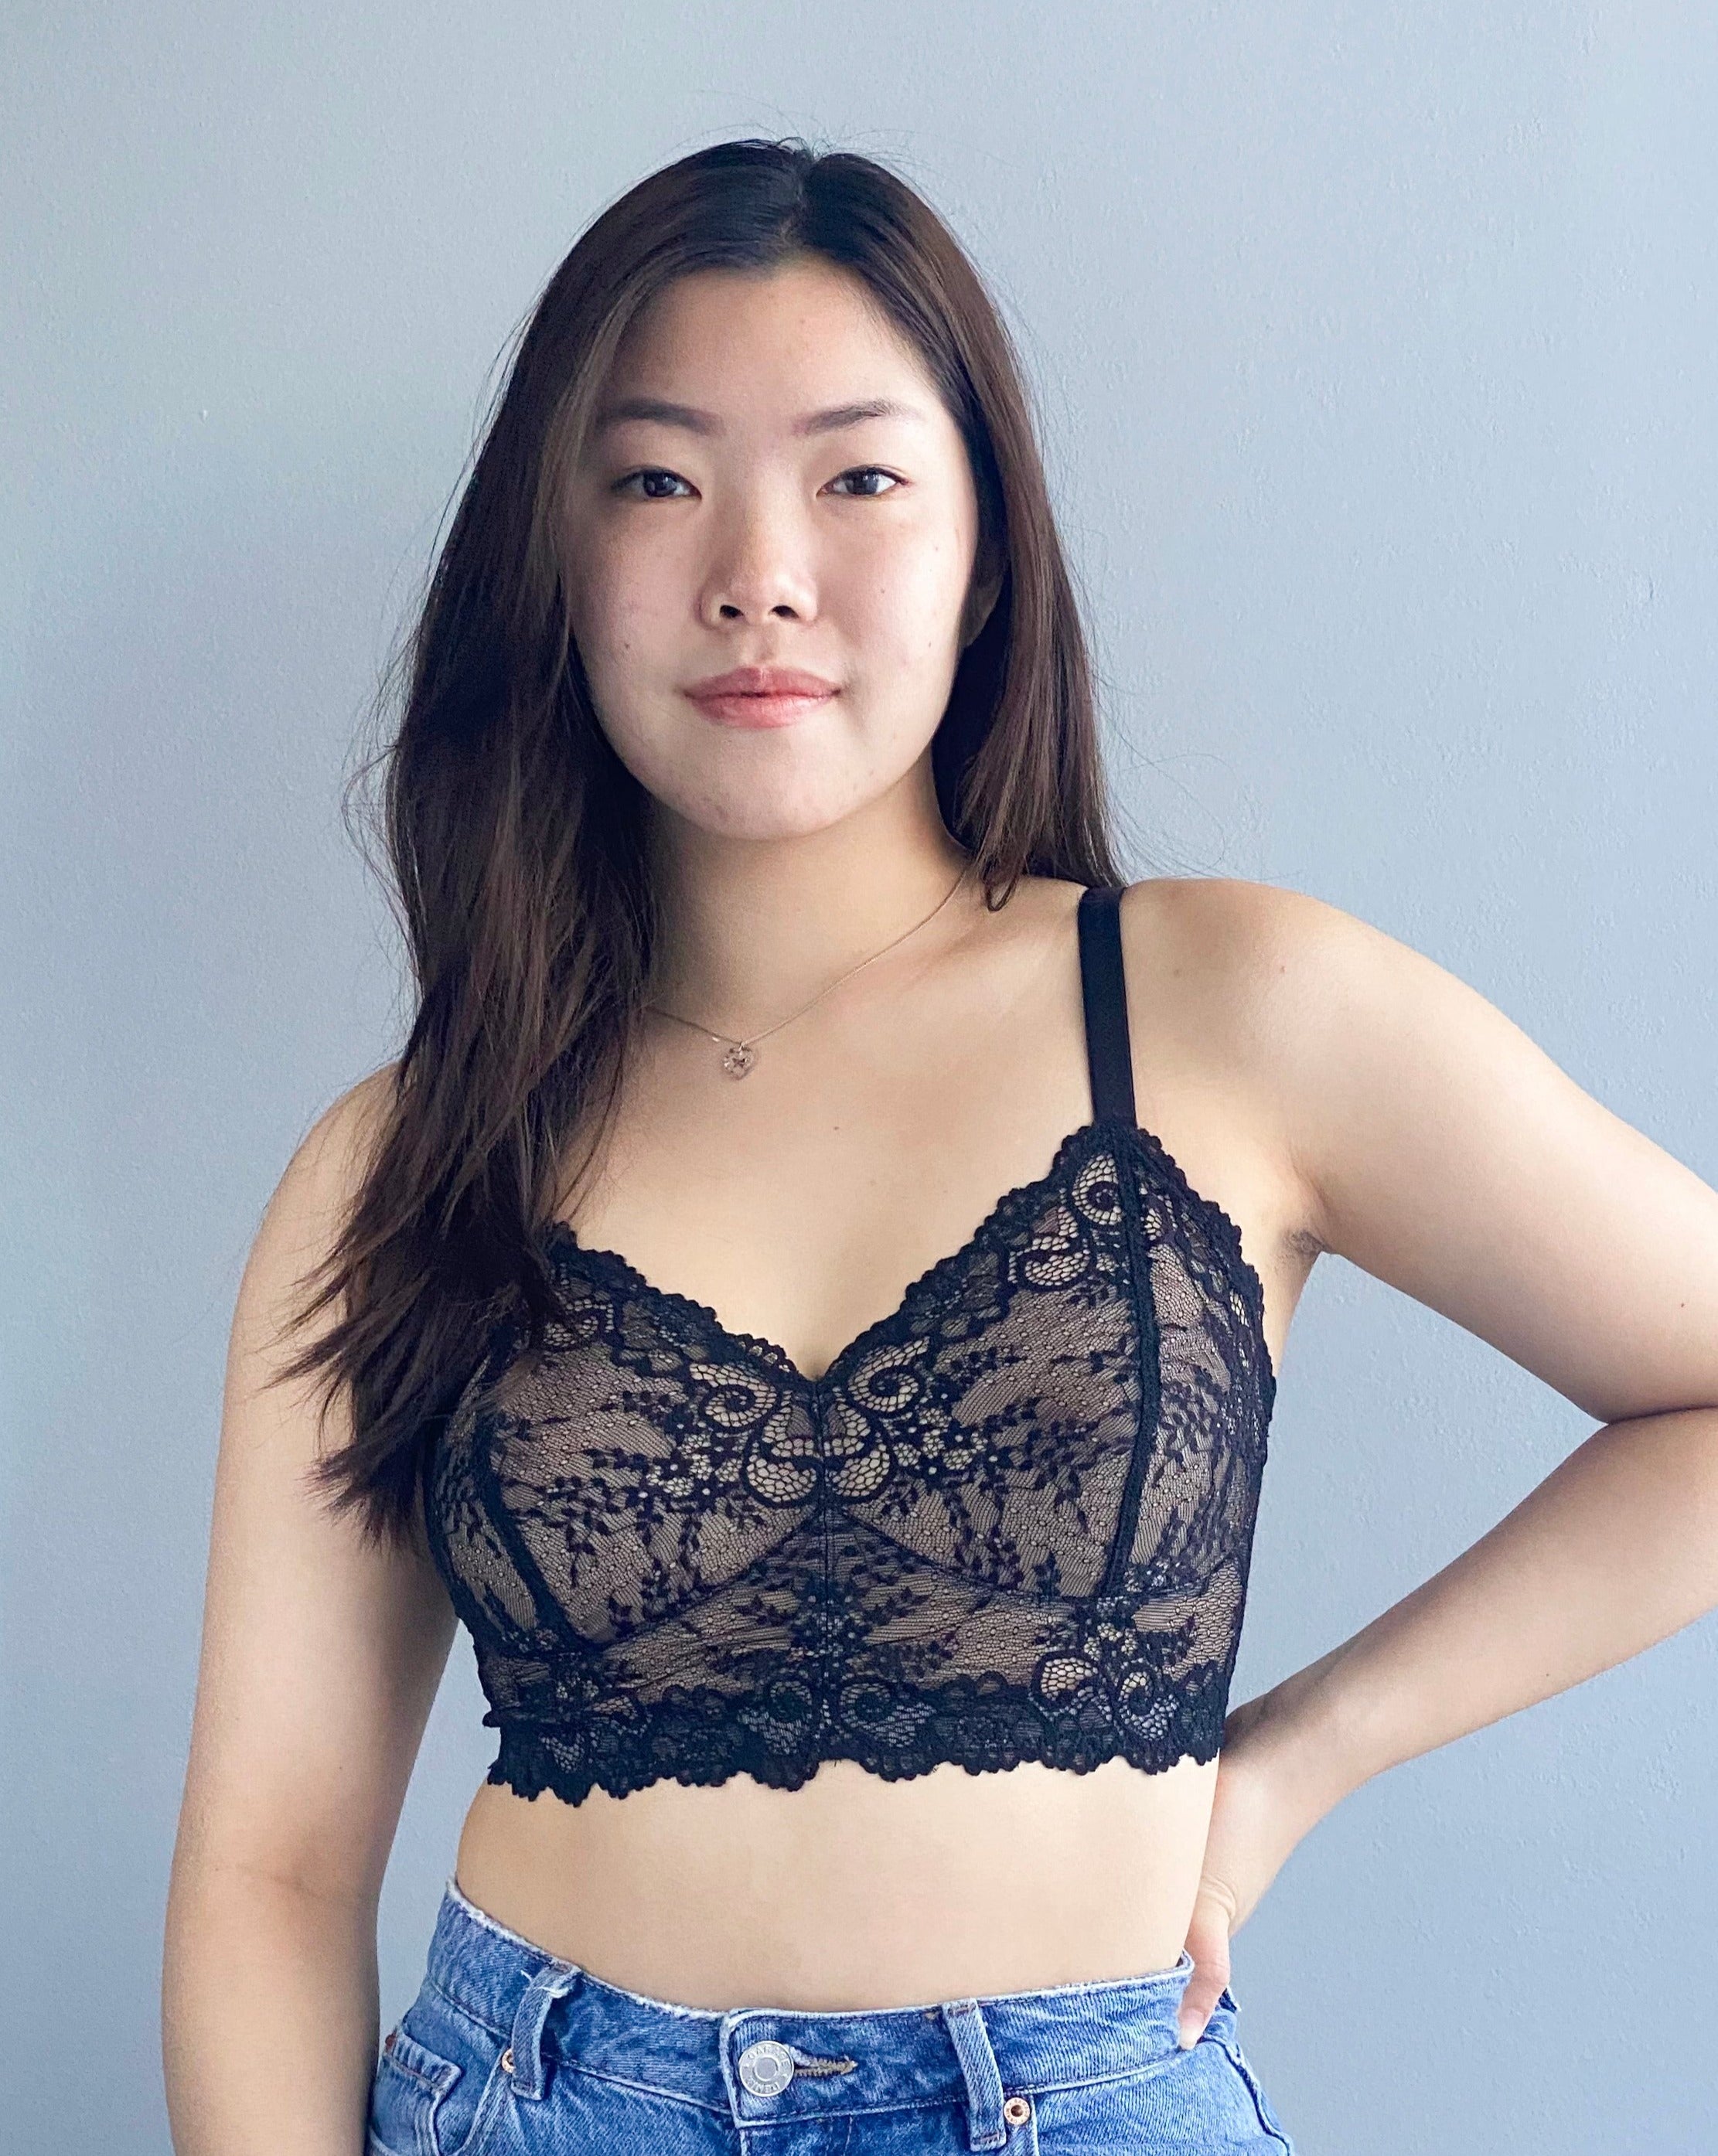 Handmade scalloped lace bras. Made in Canada